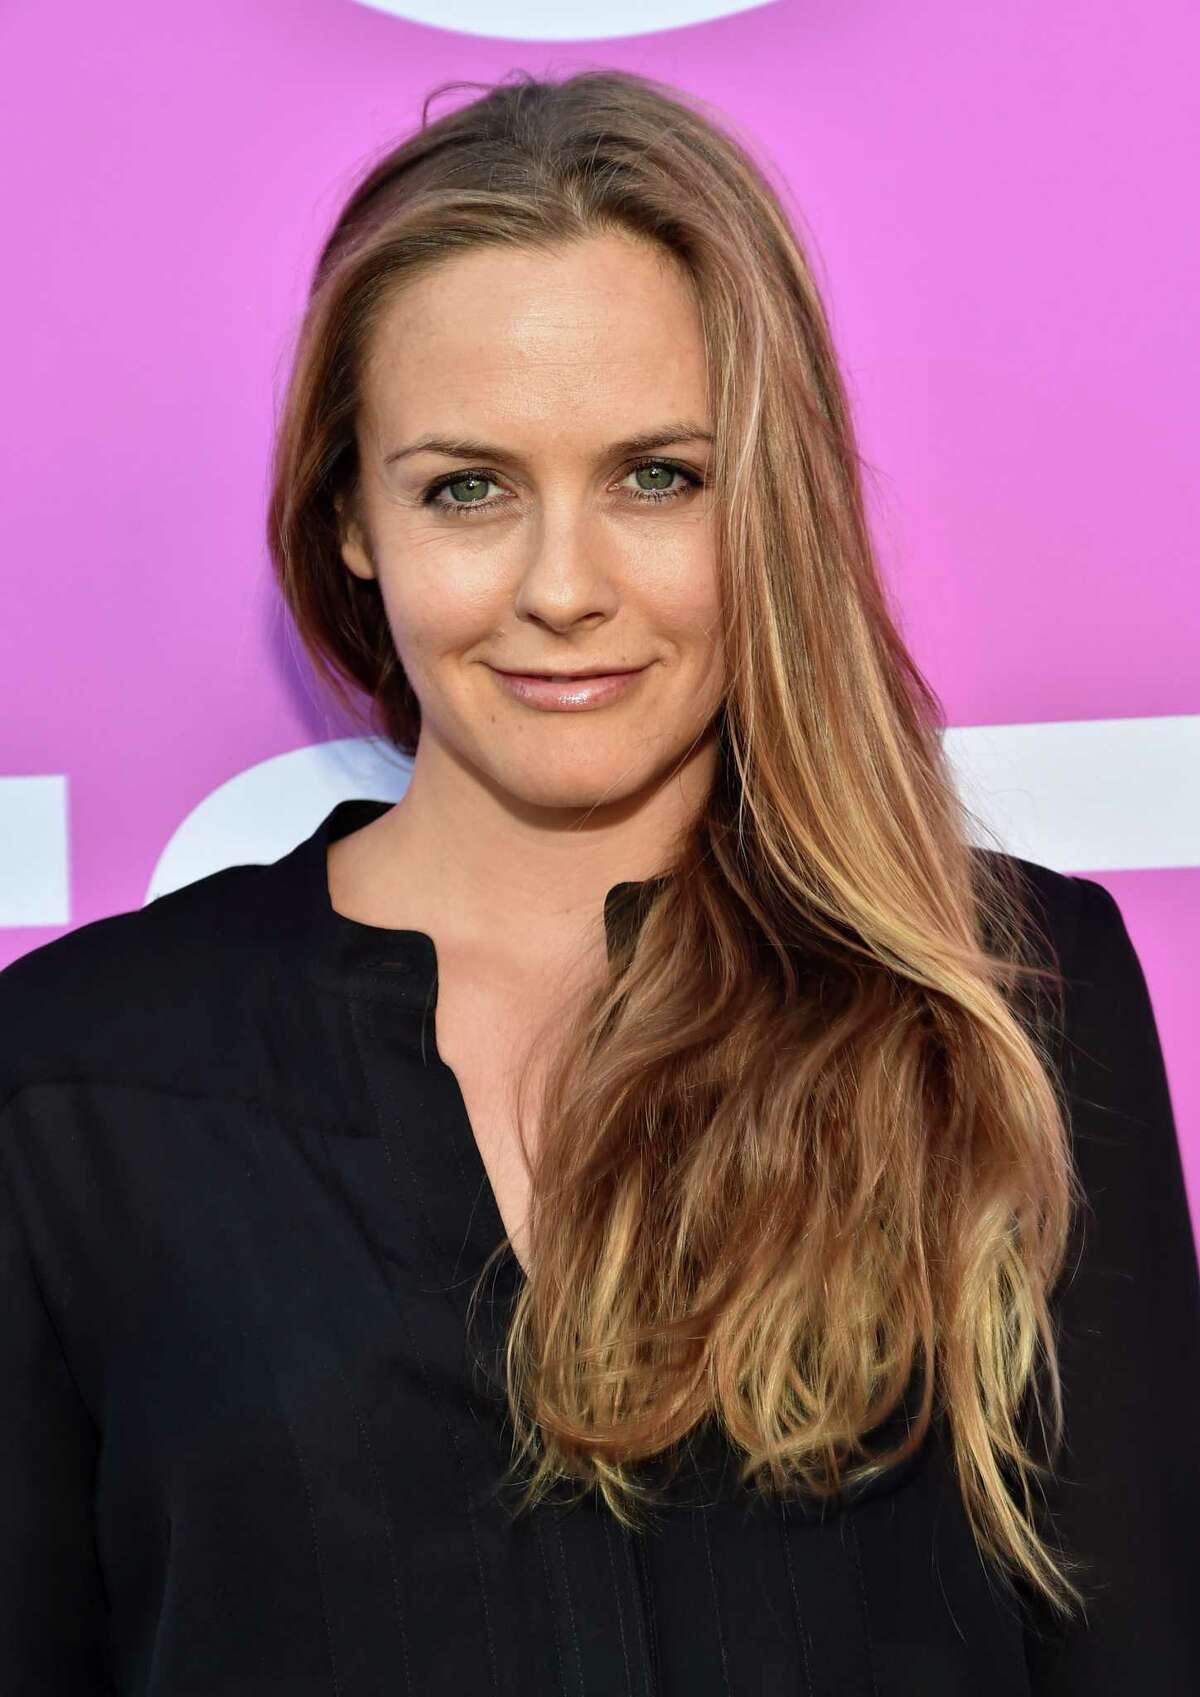 Alicia Silverstone is still a fixture in the Hollywood scene who also brought her Kind diet/lifestyle to the forefront.